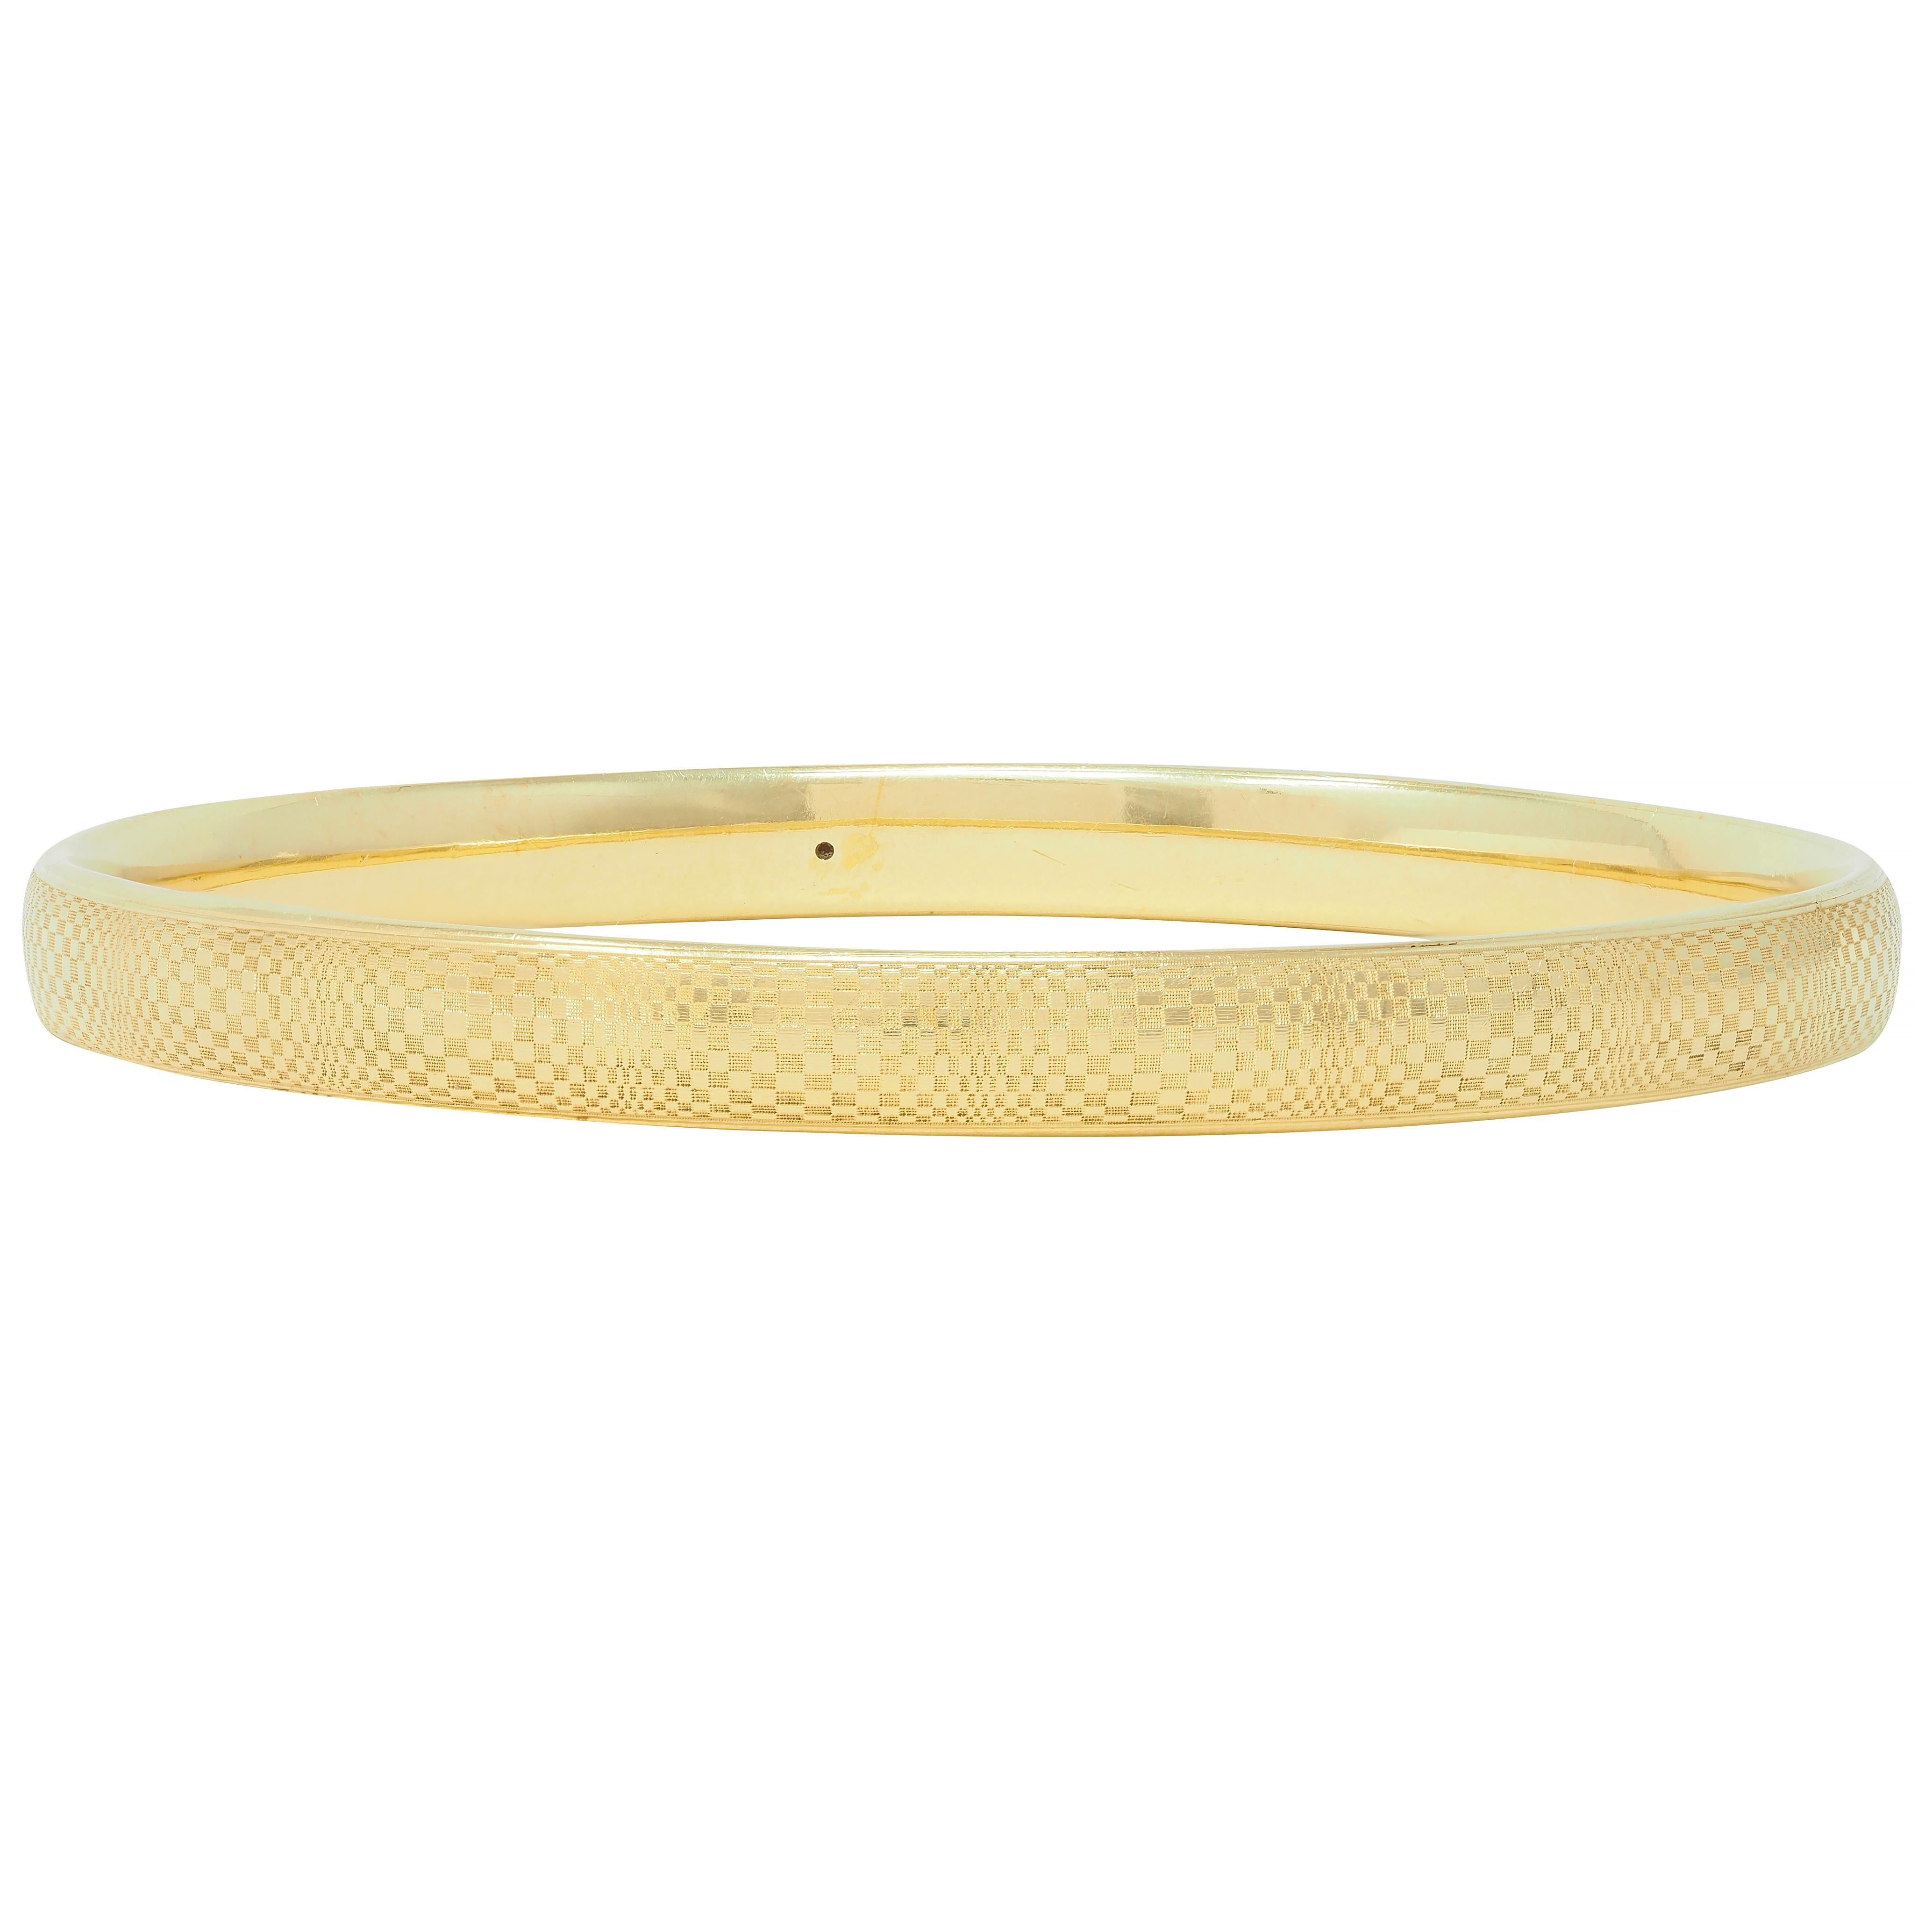 Designed as a round bangle bracelet with an intricately engraved checkerboard pattern
Abstracted with spherical optical allusion quality fully around 
With ridged edges
Stamped for 18 karat gold
Circa: 20th century 
Width at widest: 1/4